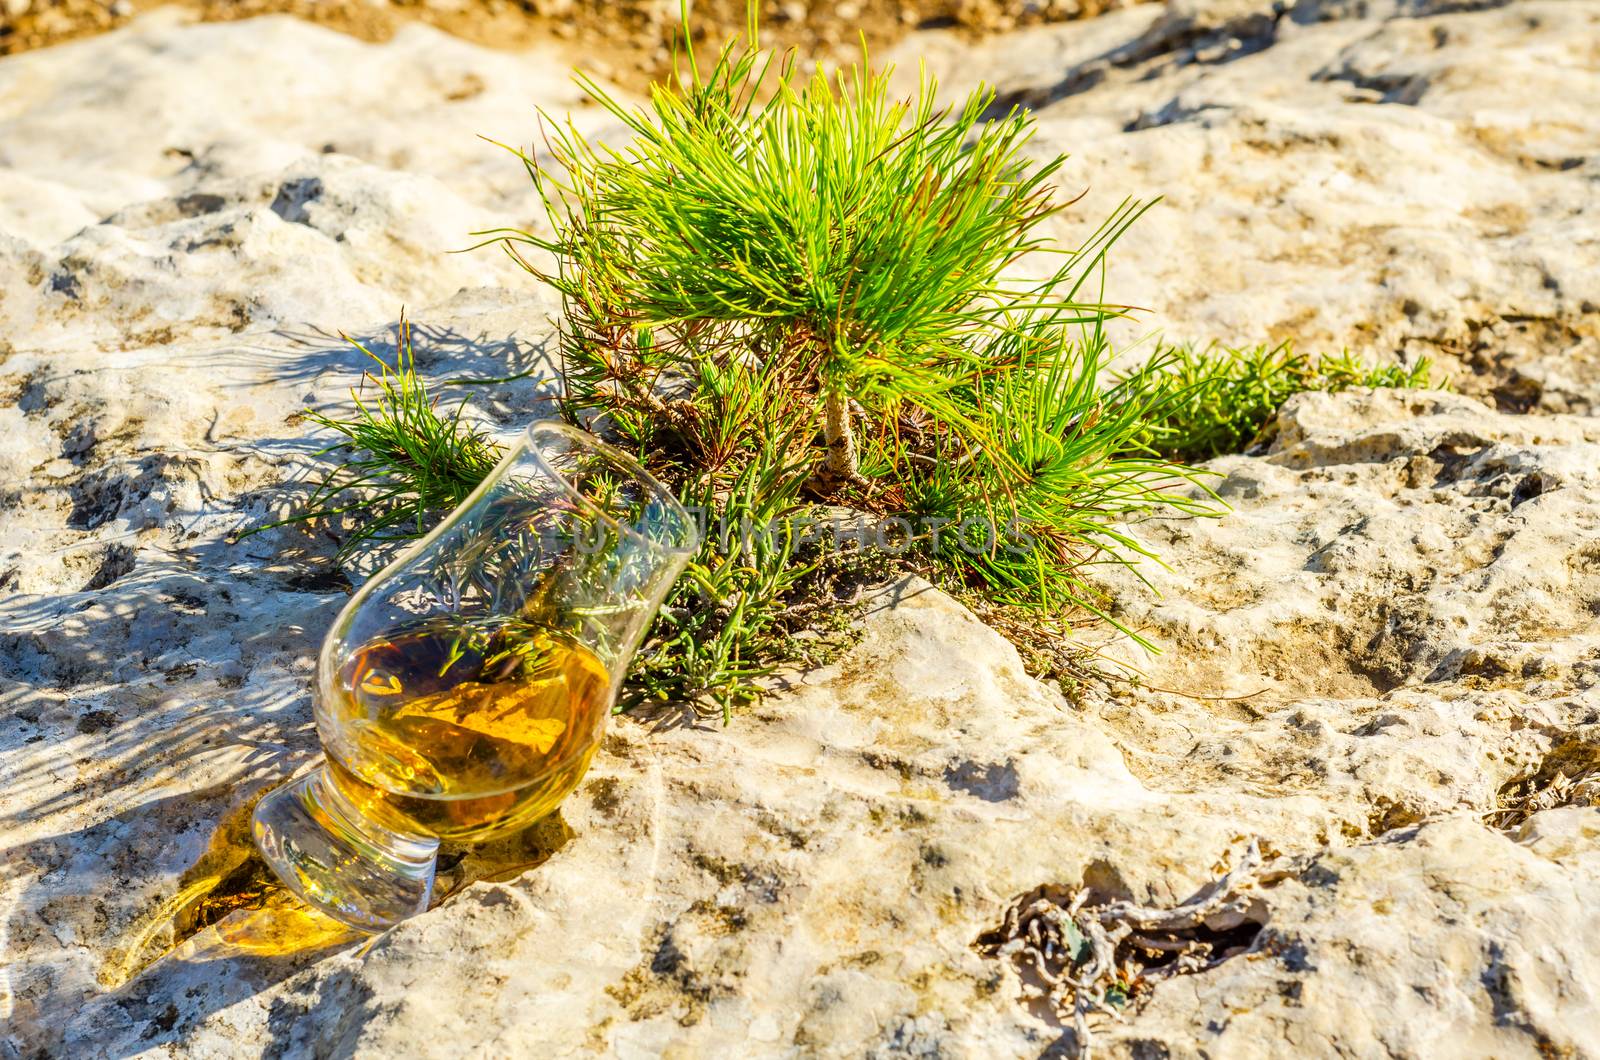 single malt whisky  in glass on plants on the rock, drink on a  natural stone, tasty set